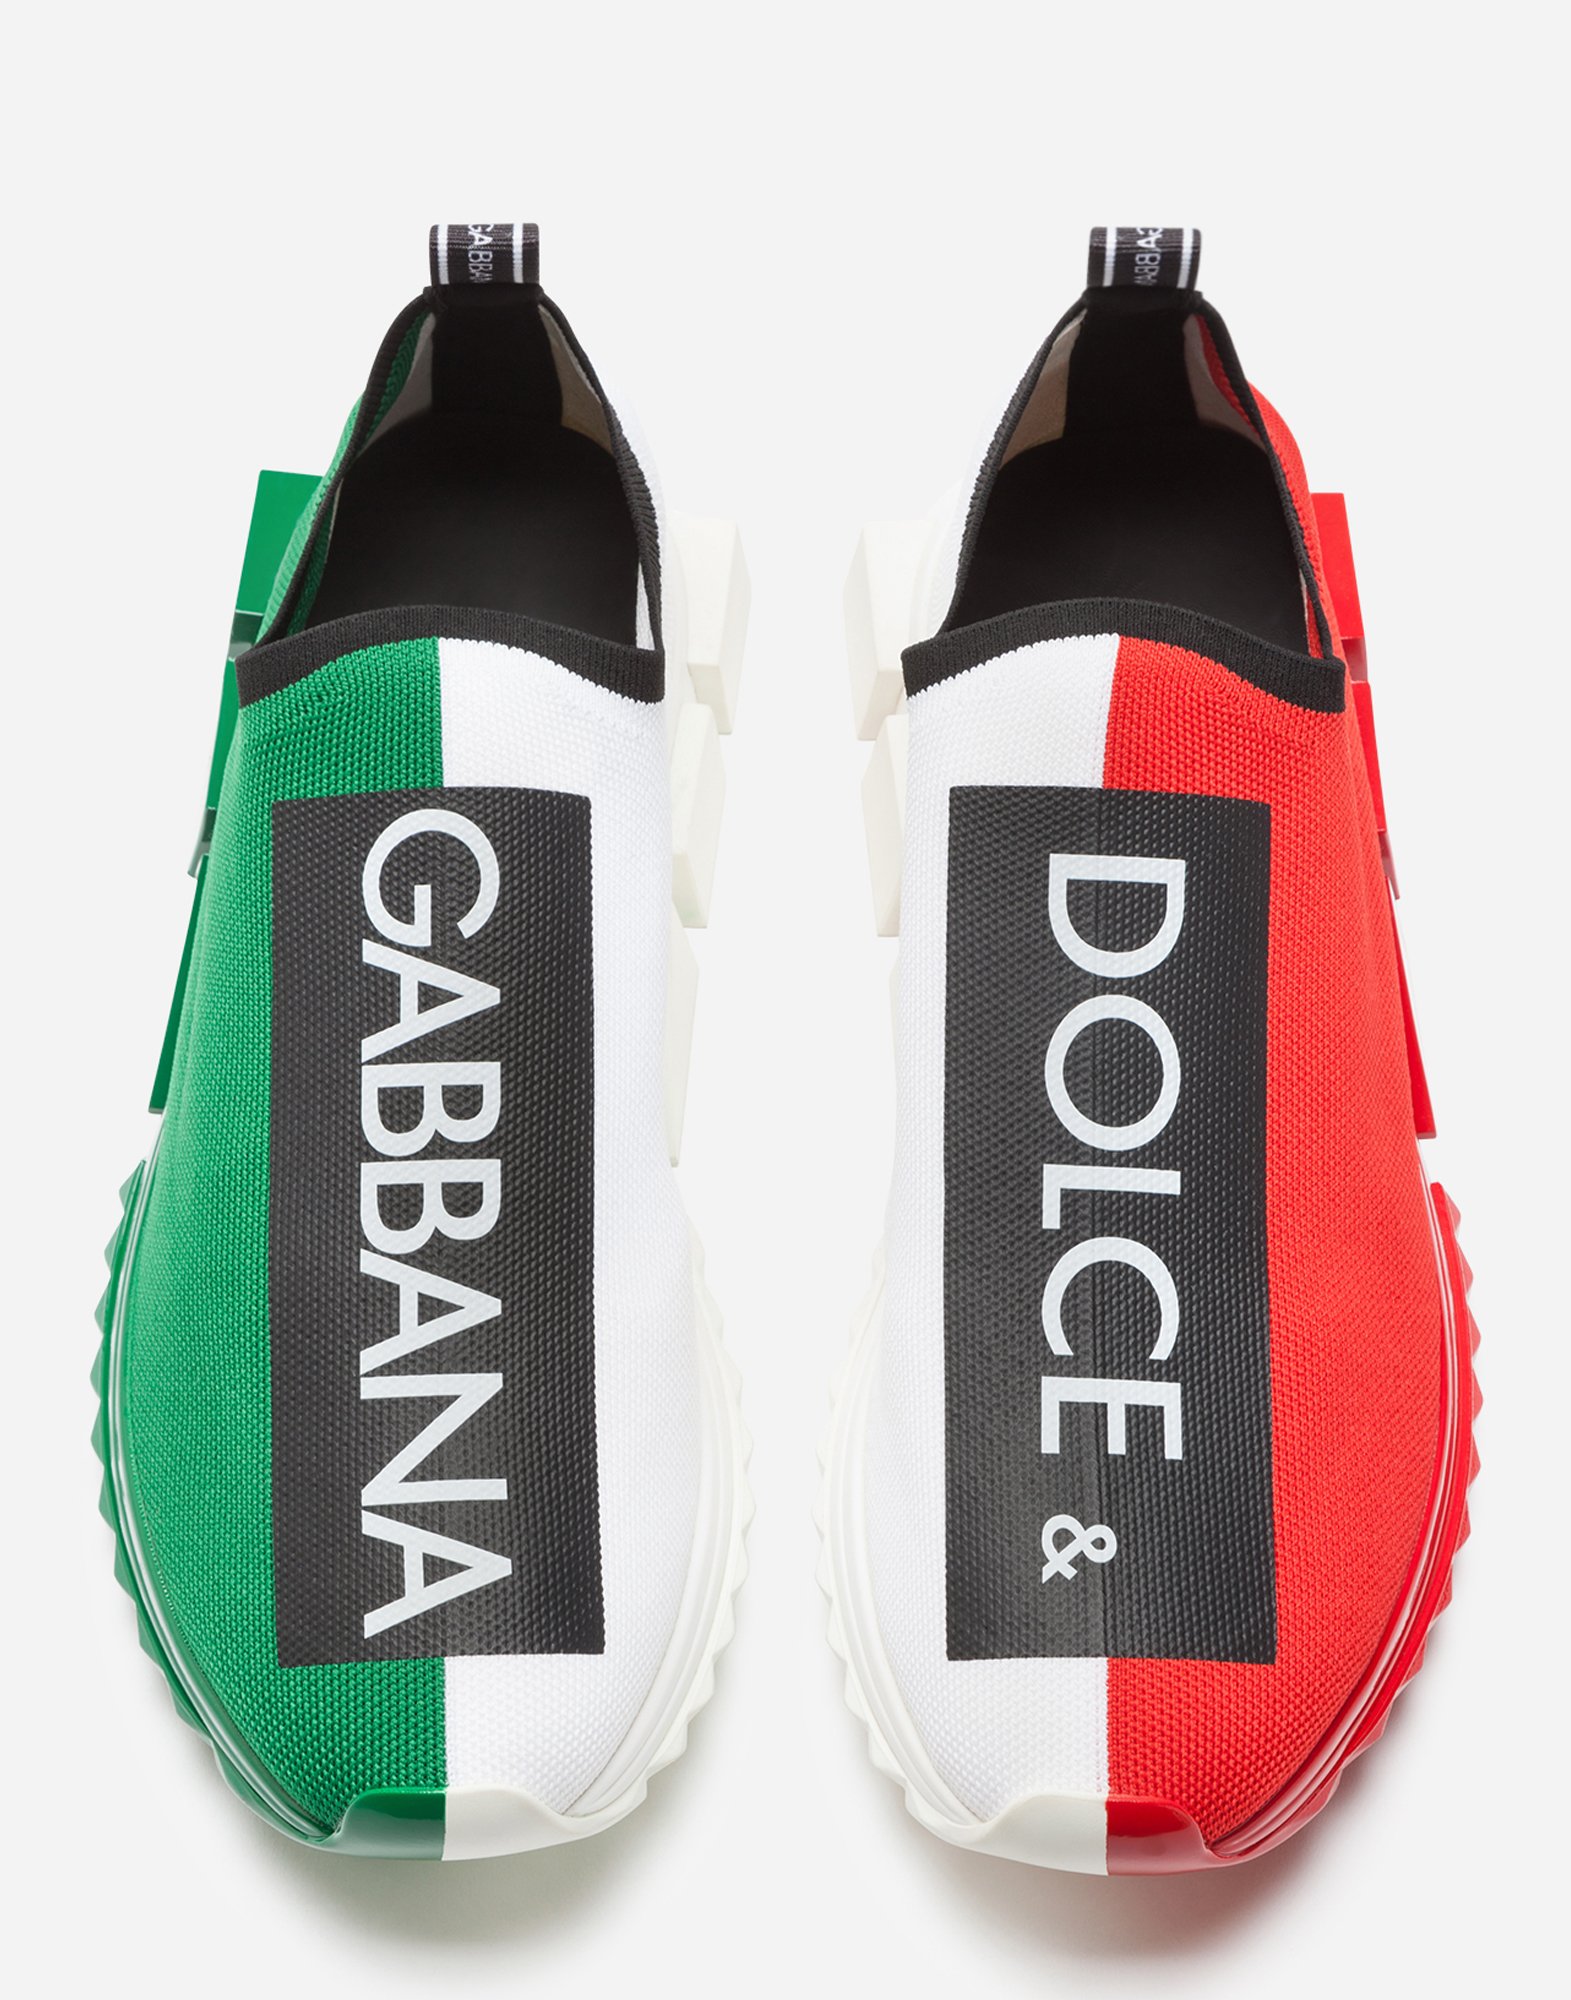 dolce and gabbana inspired shoes